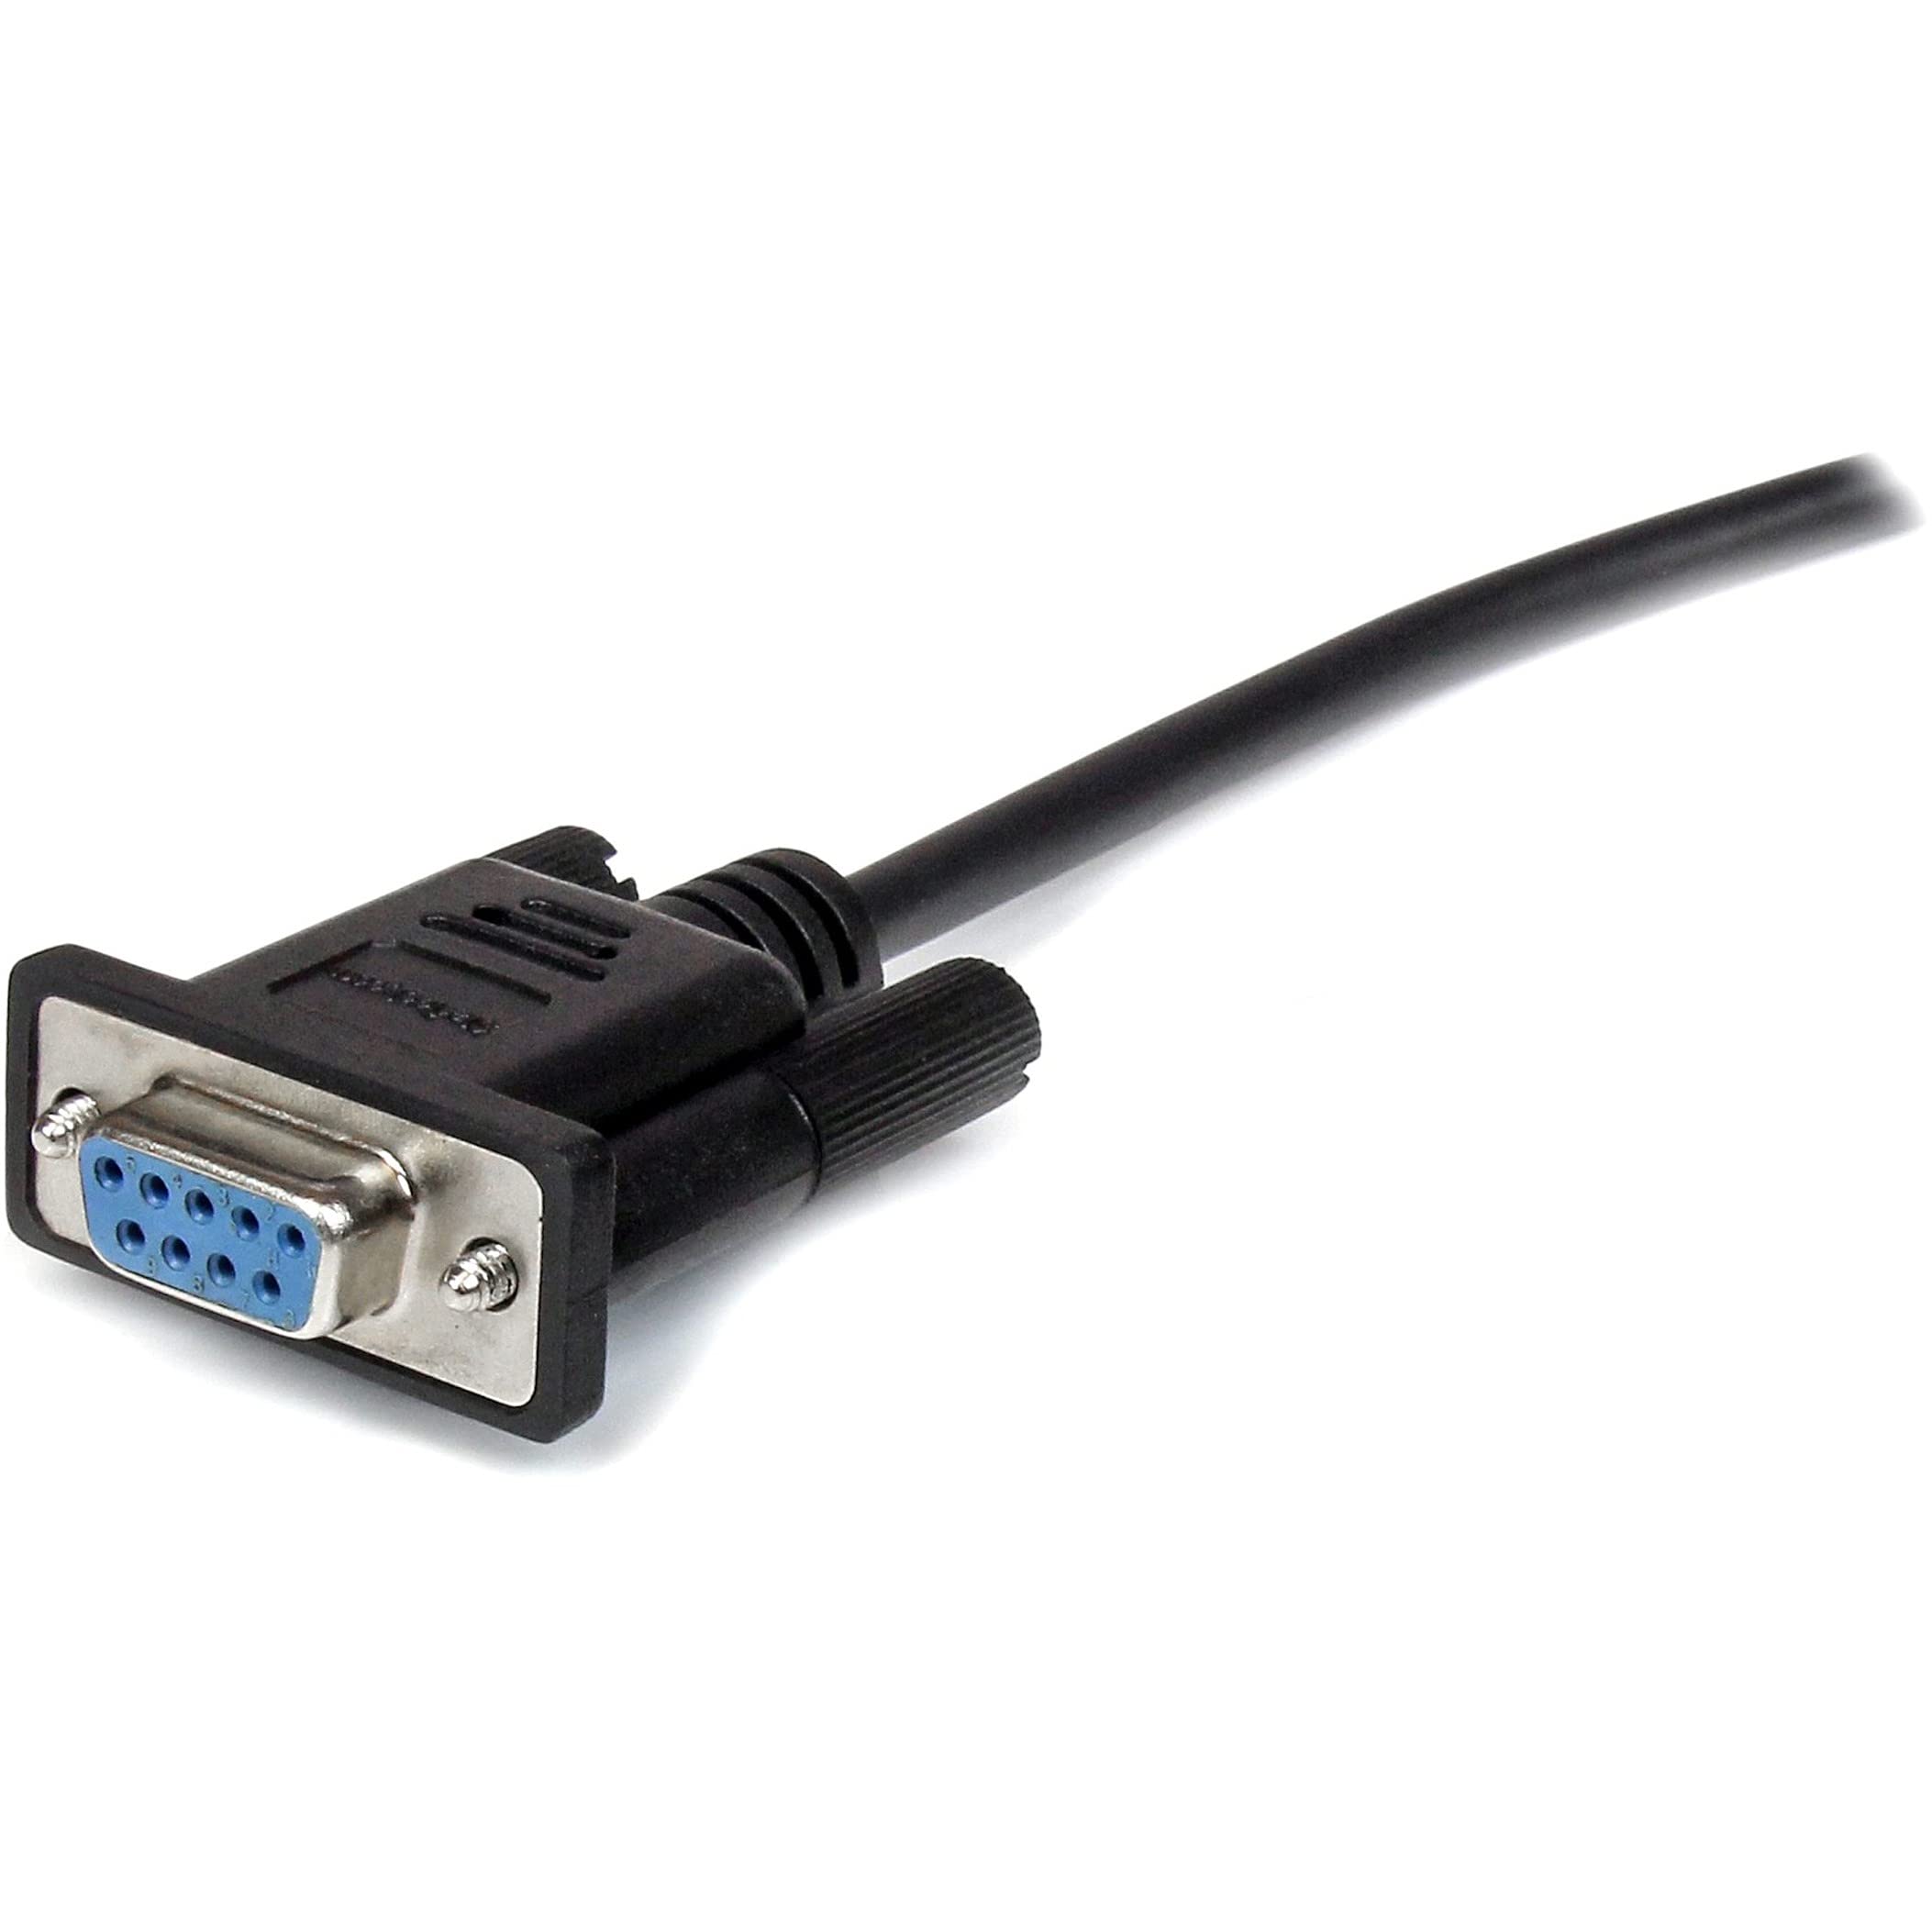 StarTech.com 3m Black Straight Through DB9 RS232 Serial Cable - DB9 RS232 Serial Extension Cable - Male to Female Cable (MXT1003MBK), 10 ft / 3m